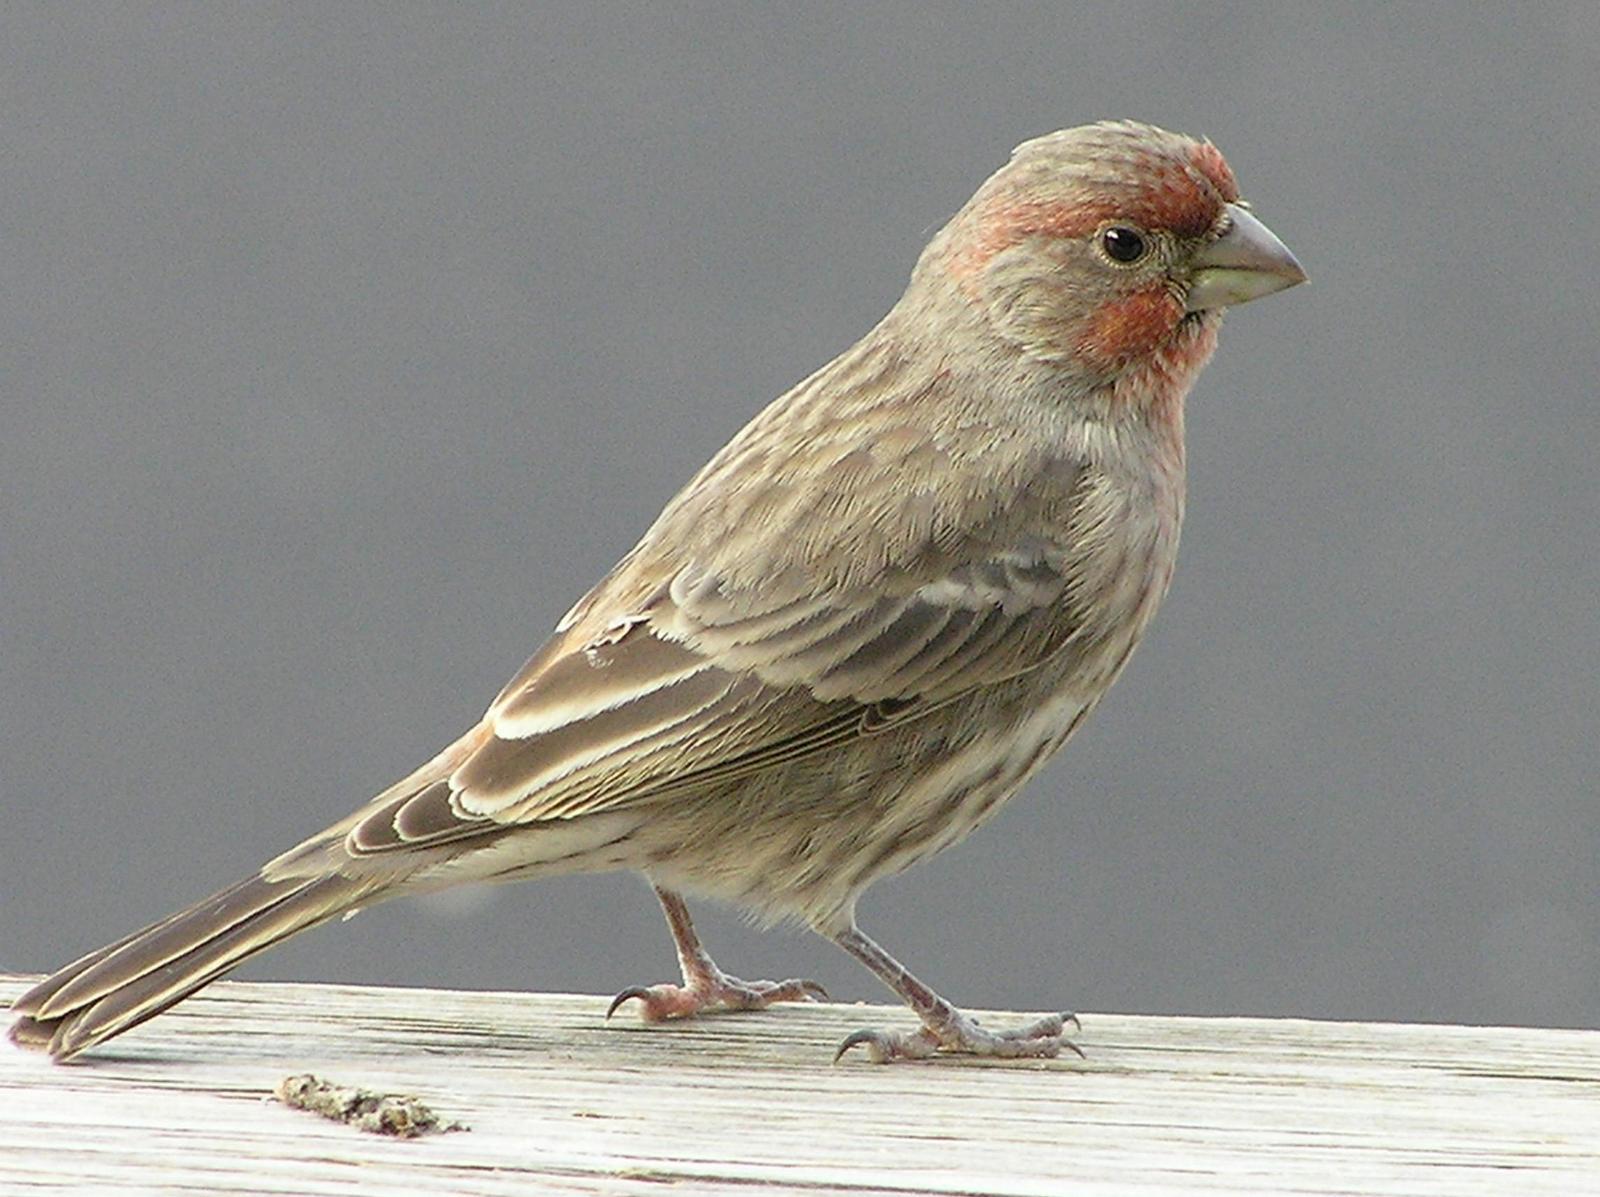 House Finch Photo by Roseanne CALECA